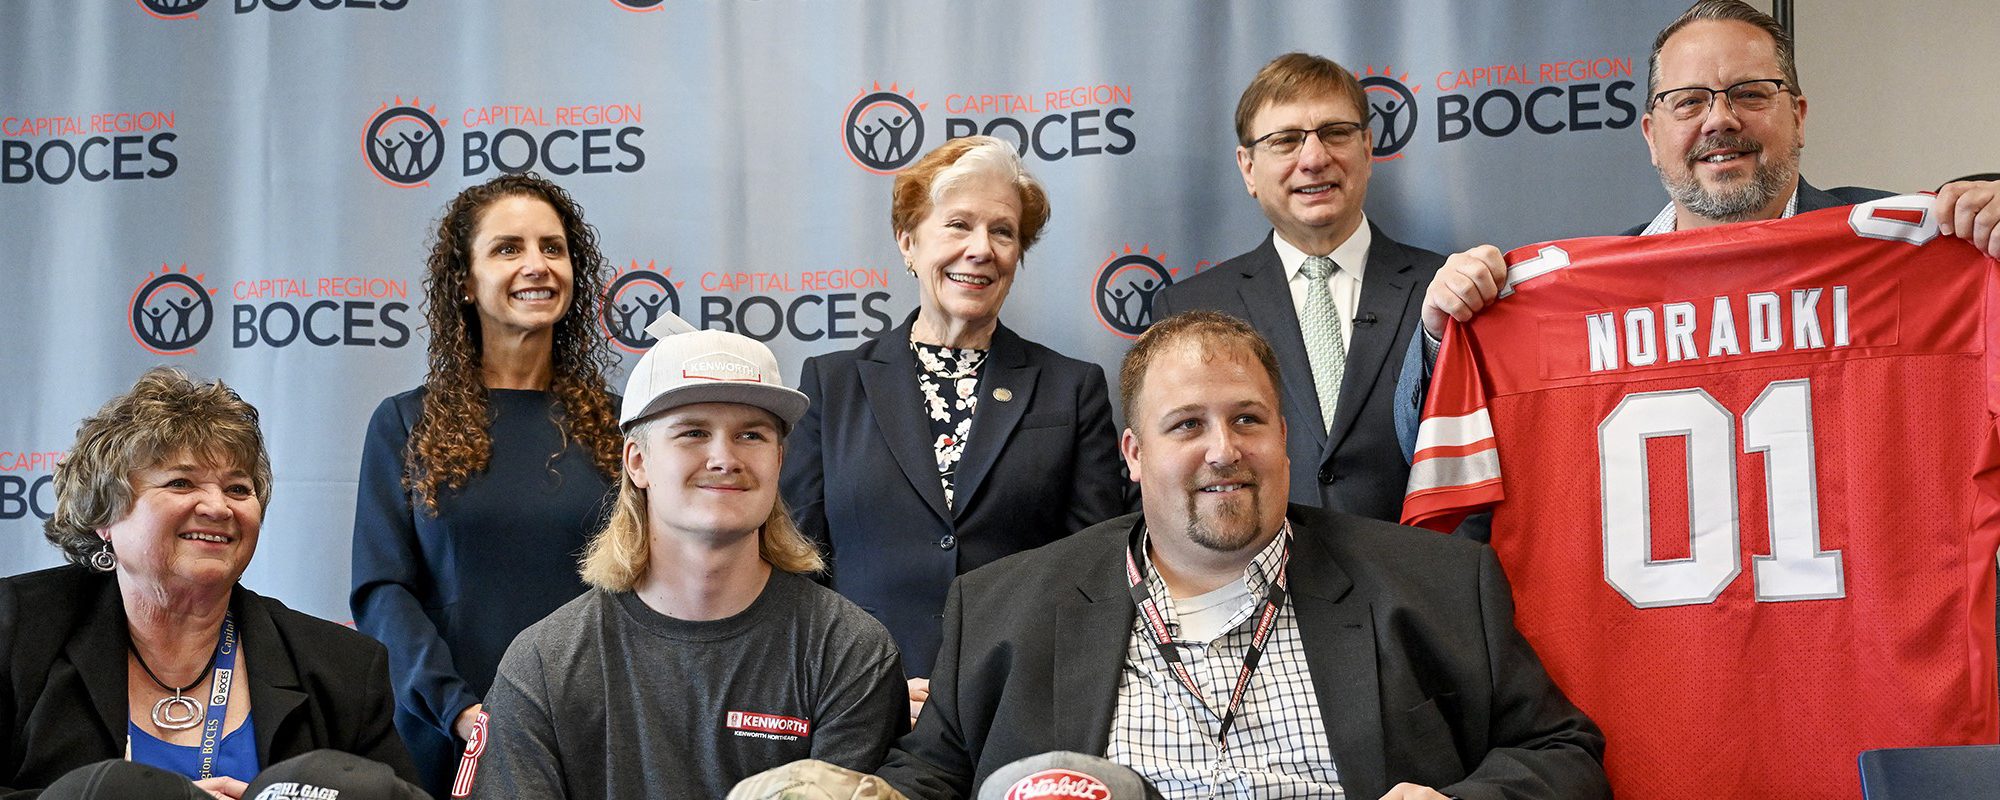 A student wears a baseball cap brandishing the name of his future employer as he's surrounded by school staff and his future boss during a Signing Day ceremony.